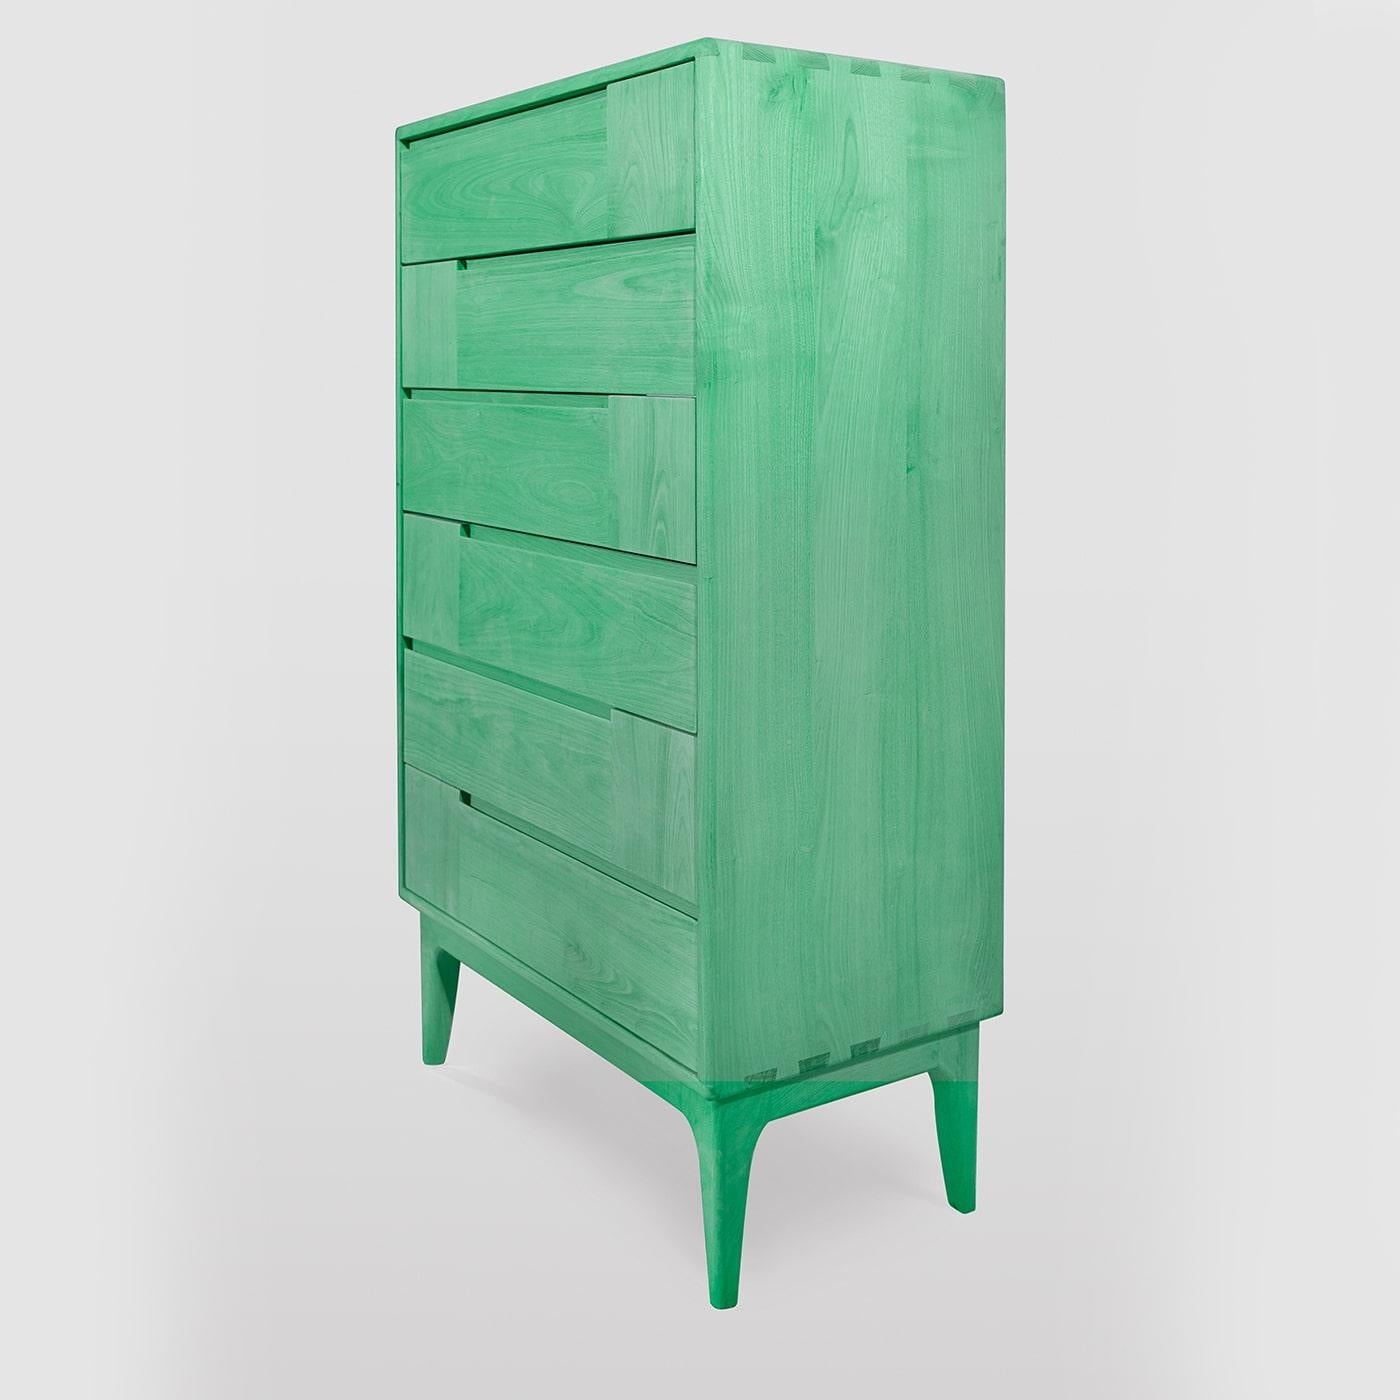 A singular design piece to complement a contemporary interior, this Scandinavian-style dresser will make a singular addition to a bedroom. Handcrafted of green-colored solid chestnut, it features six drawers boasting horizontal and vertical lines,